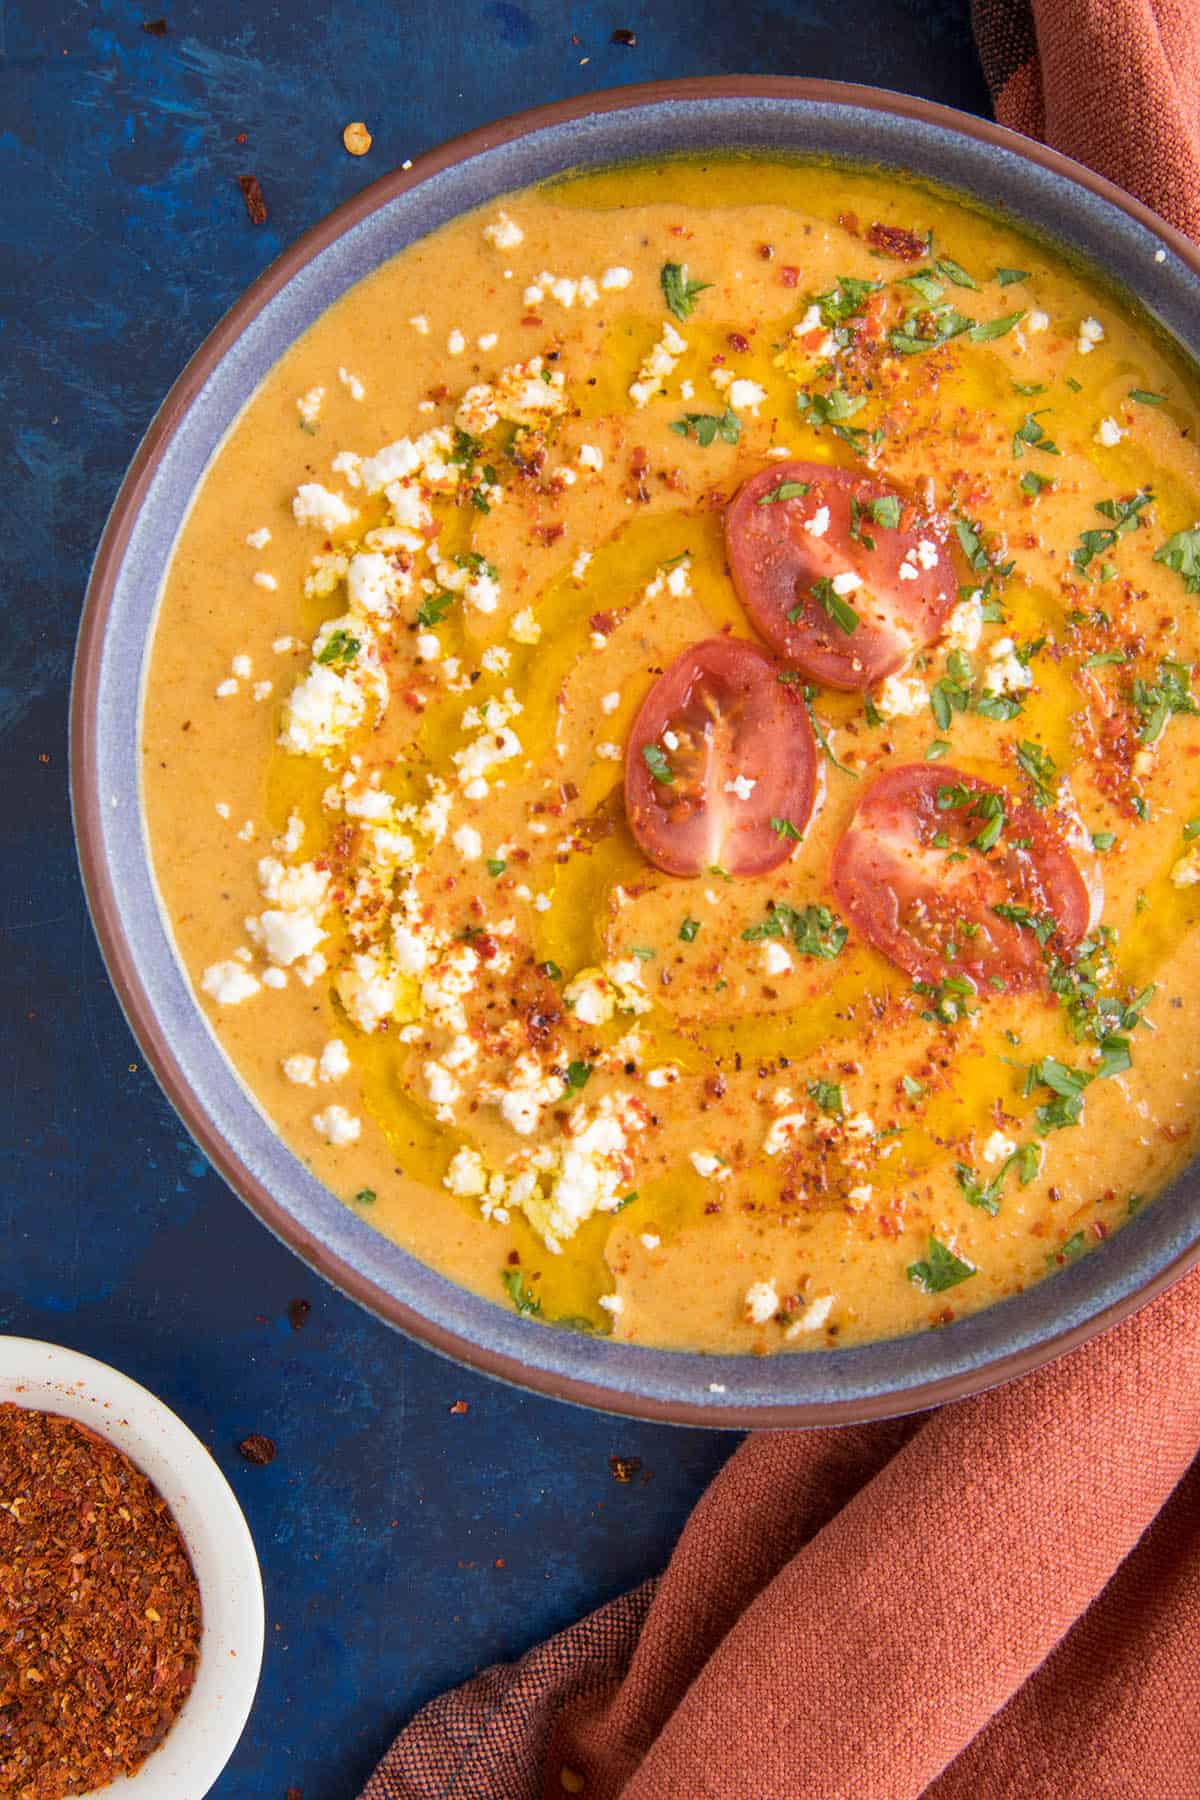 Creamy Roasted Hatch Chile Soup - In a bowl and ready to eat